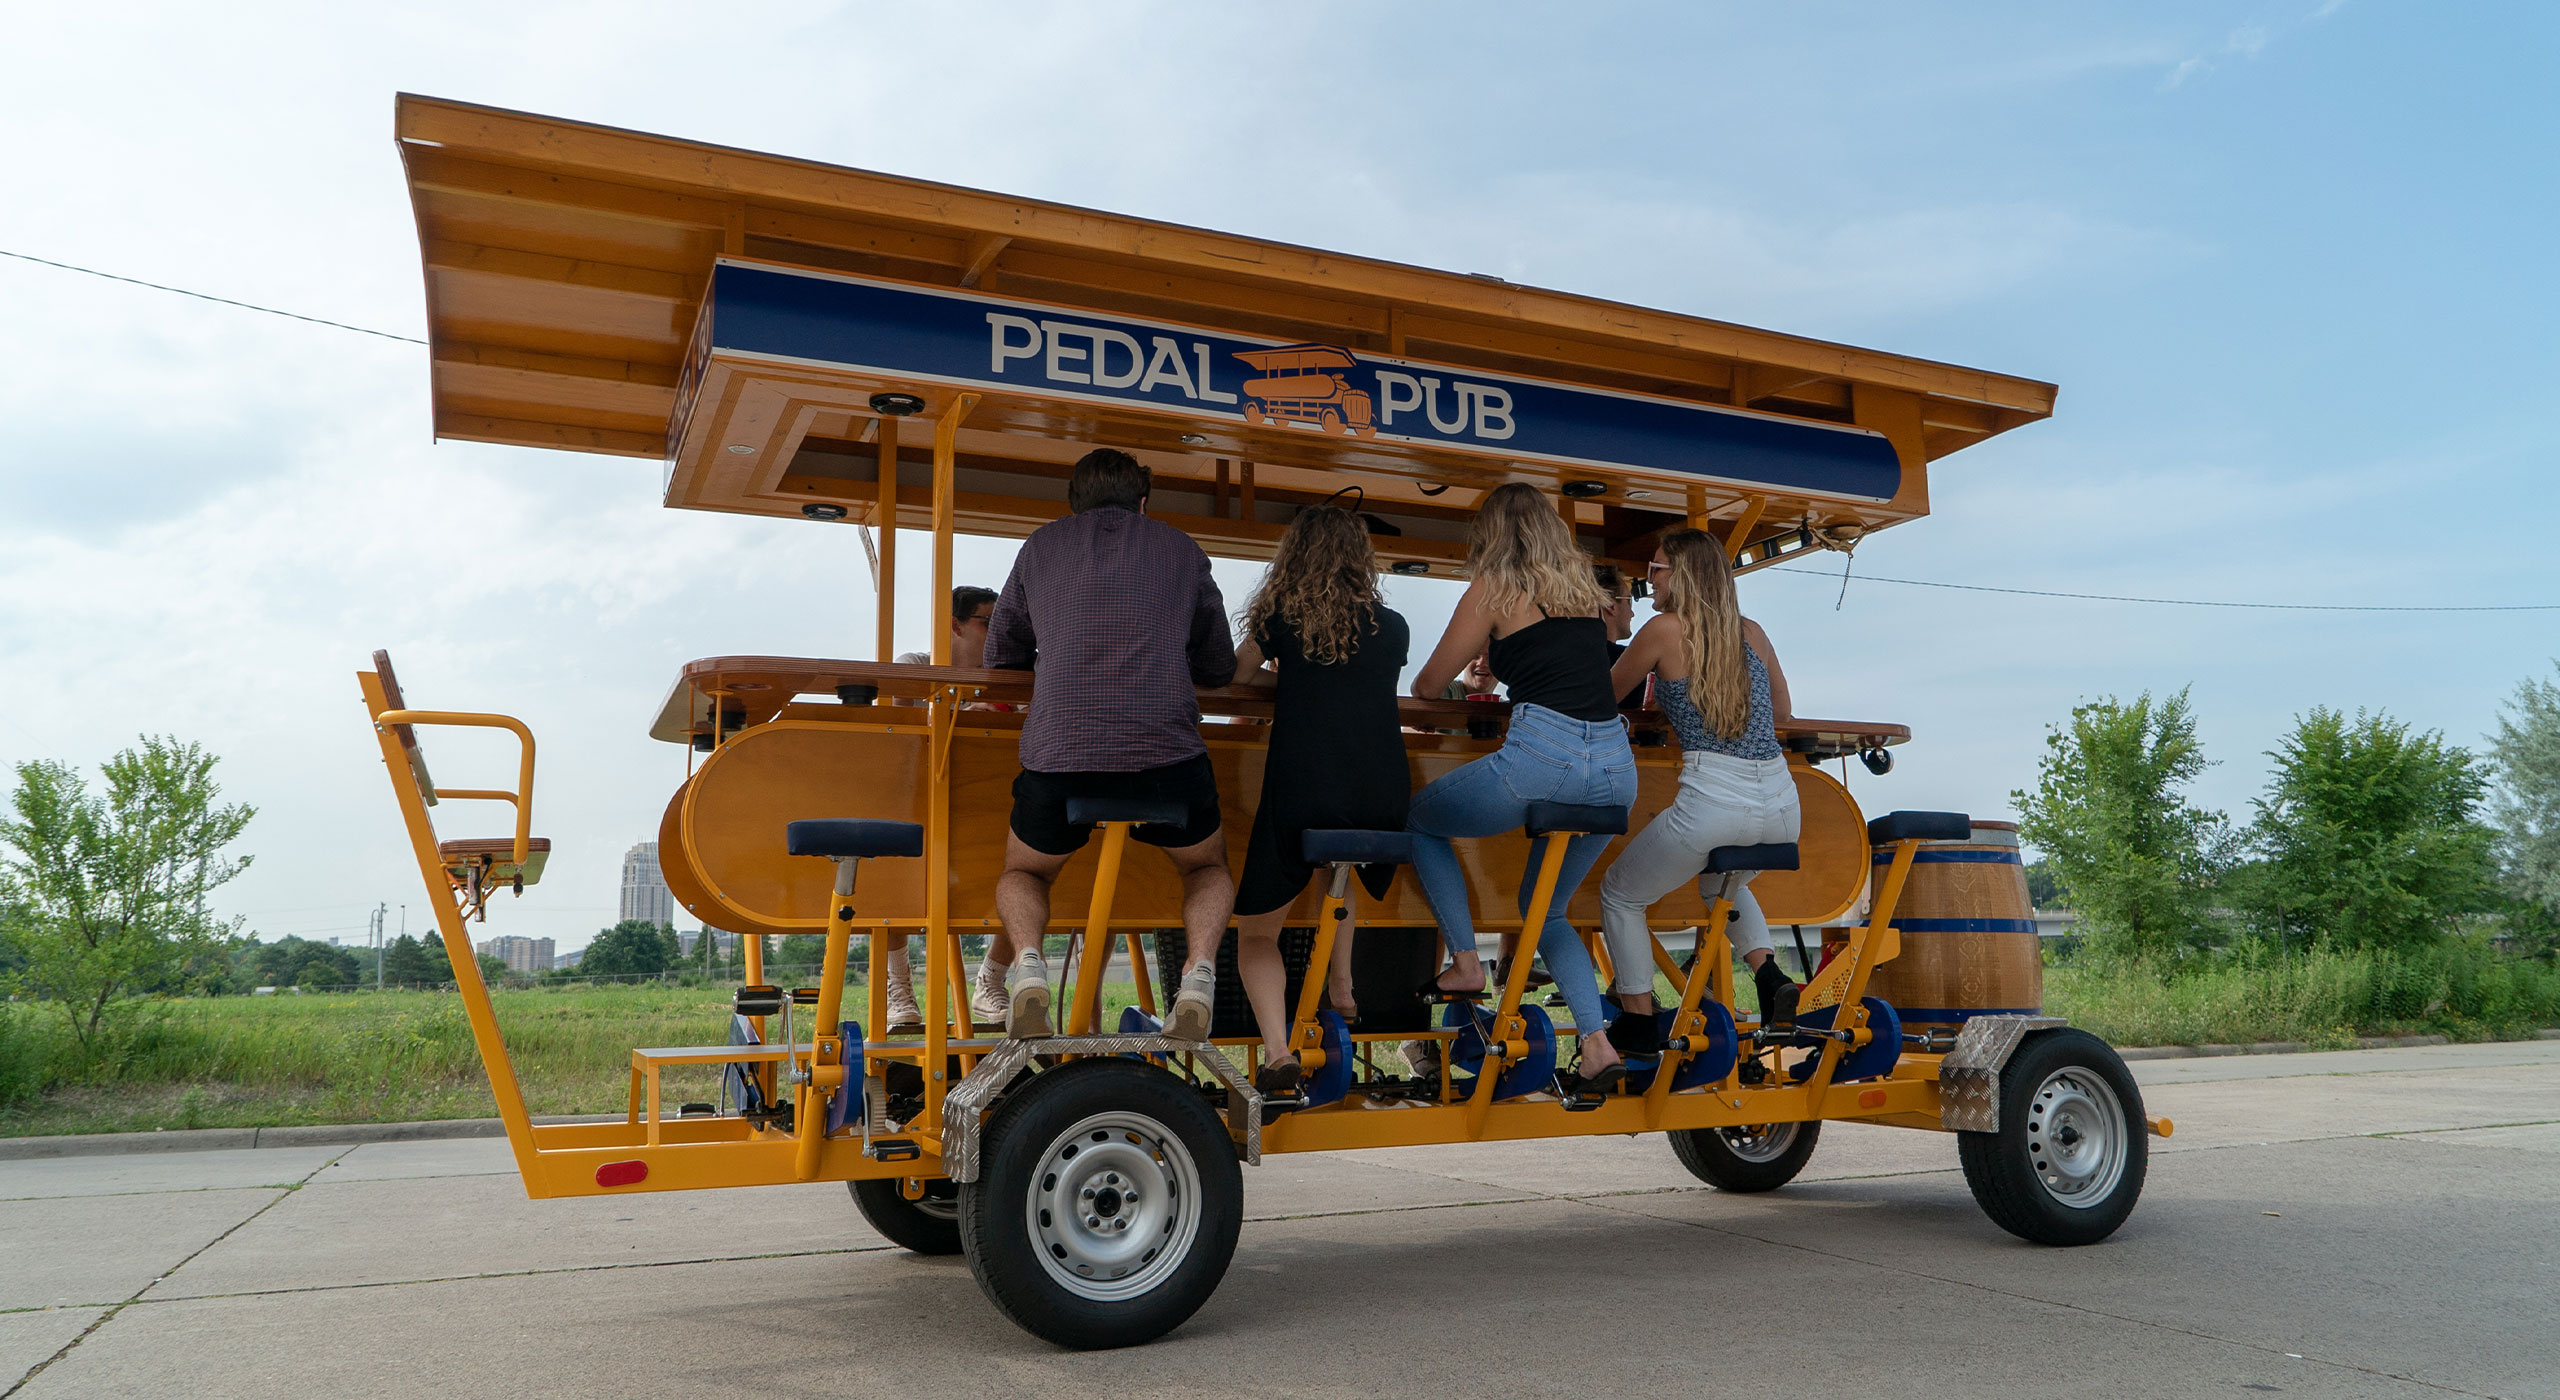 Saskatoon Entrepreneurs Launch ‘Pedal Pub,’ First of Its Kind in City